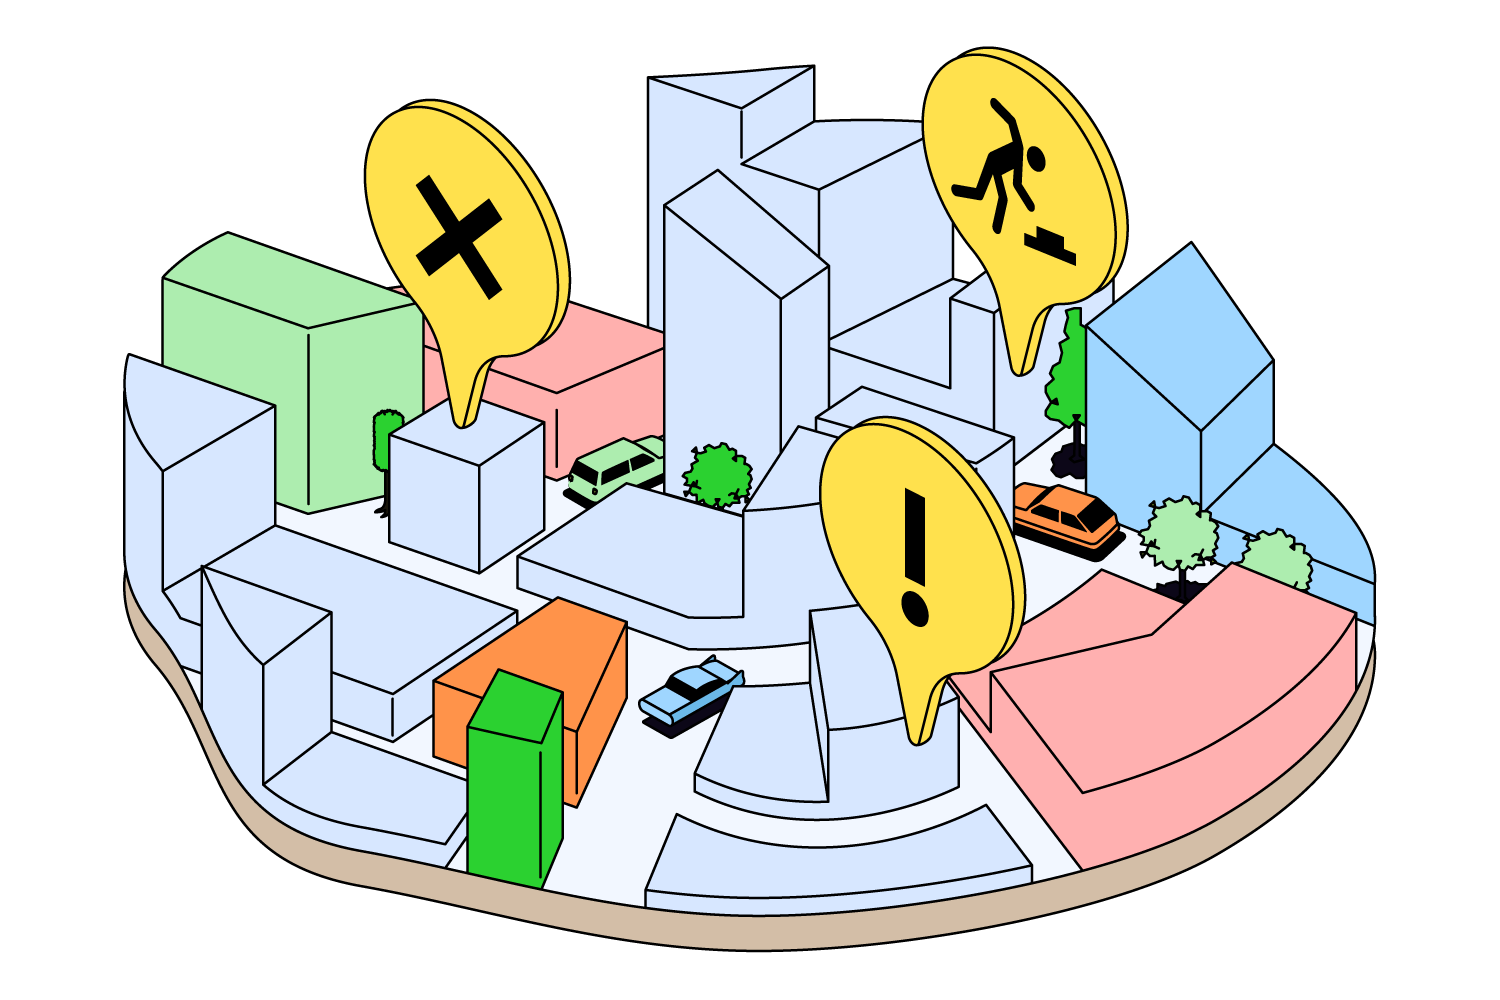 An illustration depicting urban infrastructure challenges